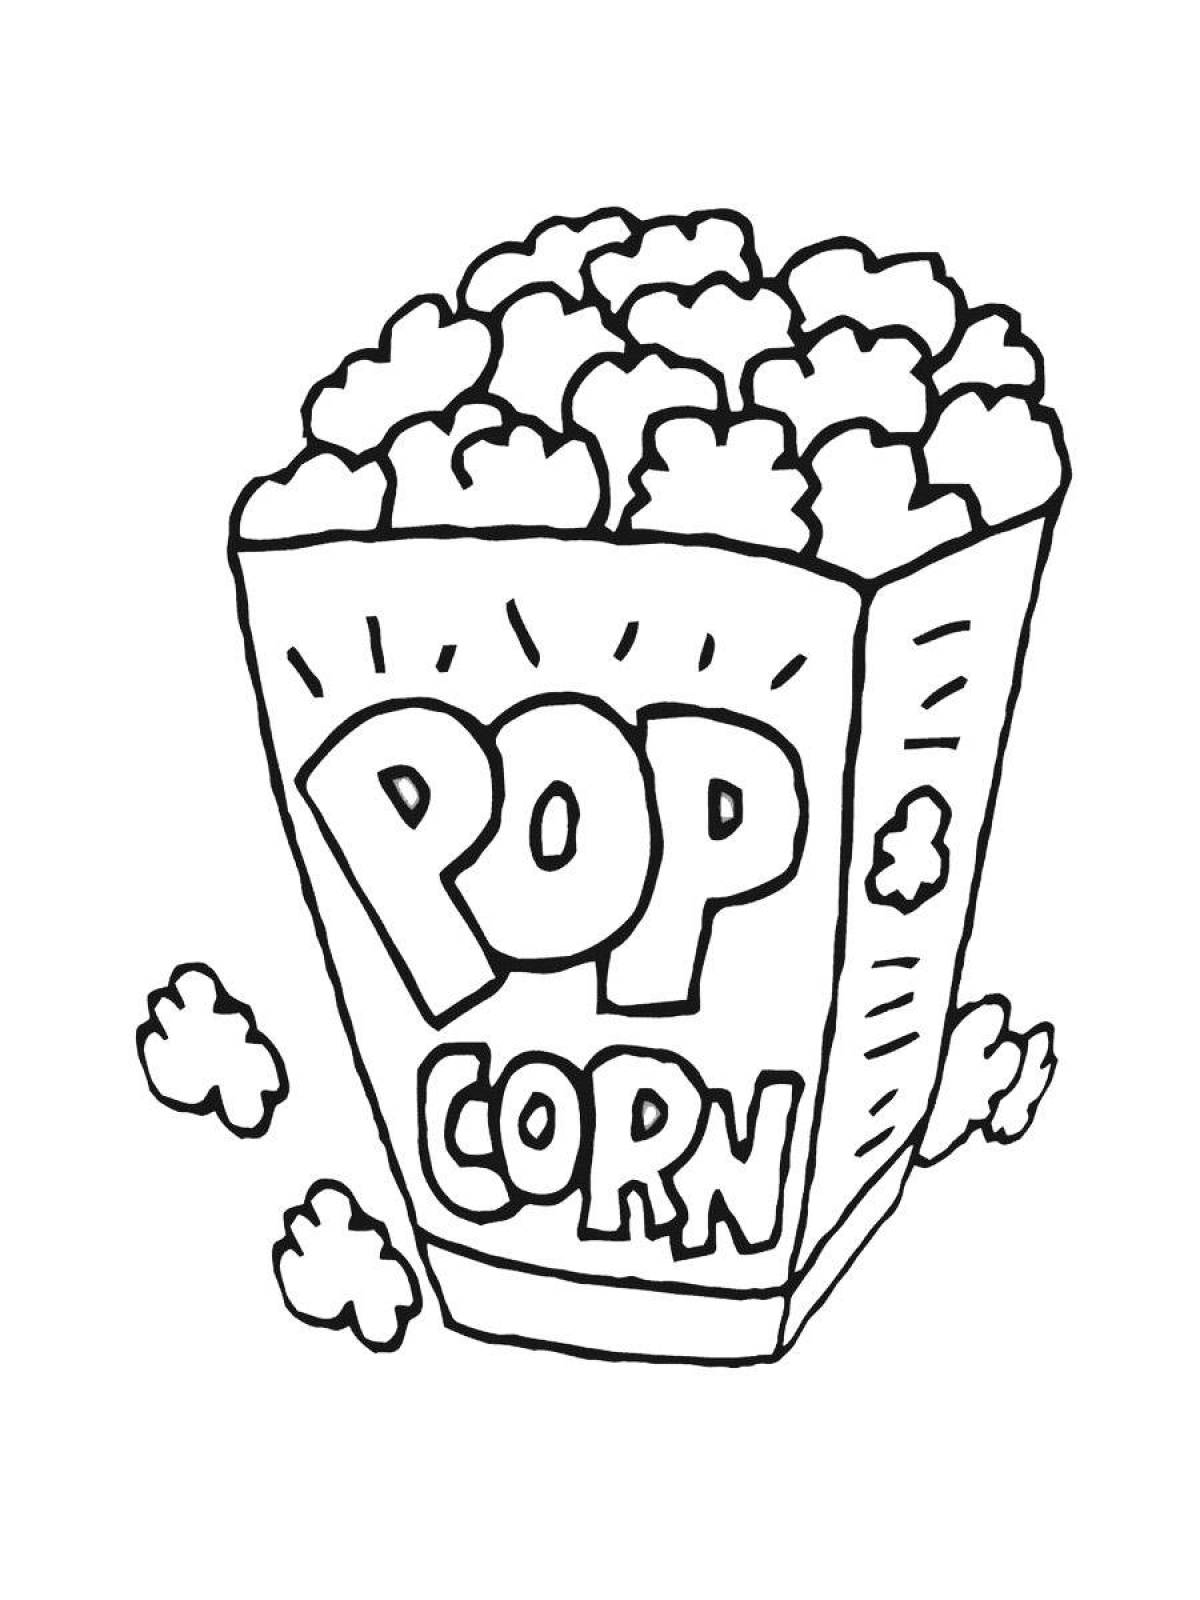 Nutritious popcorn coloring page